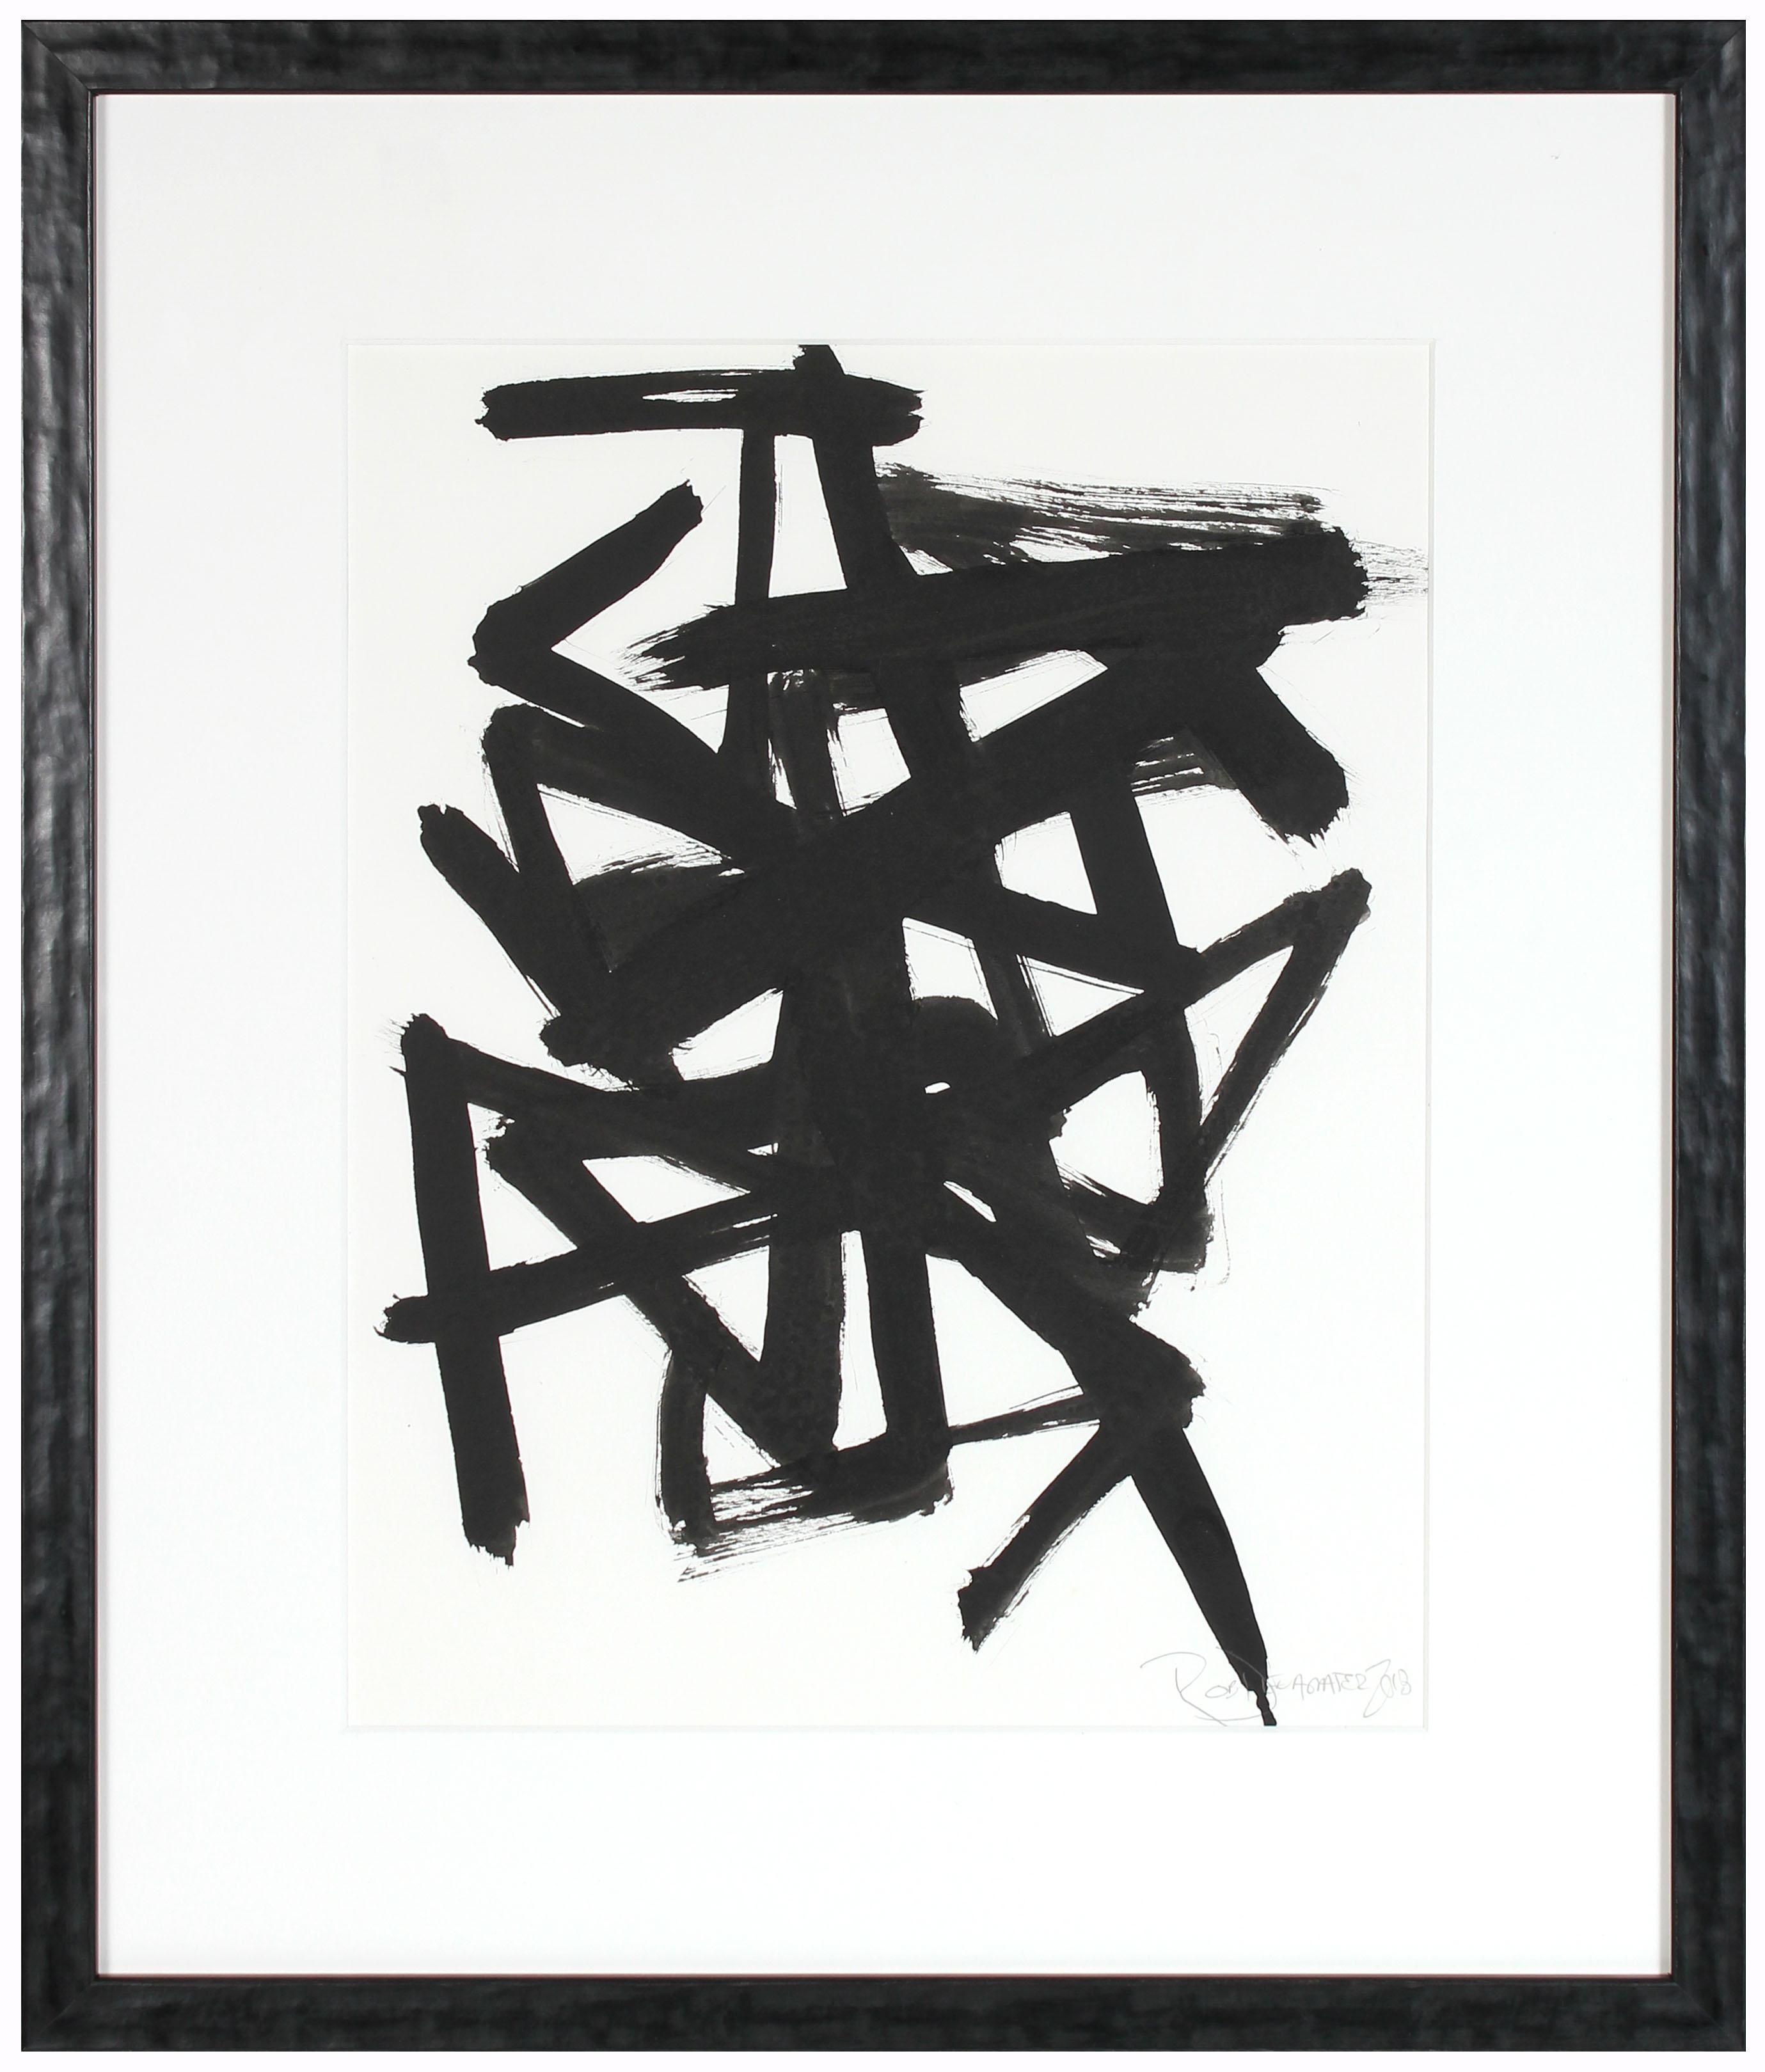 Rob Delamater Abstract Drawing - "Parlance VI" Abstract Expressionist Ink Drawing 